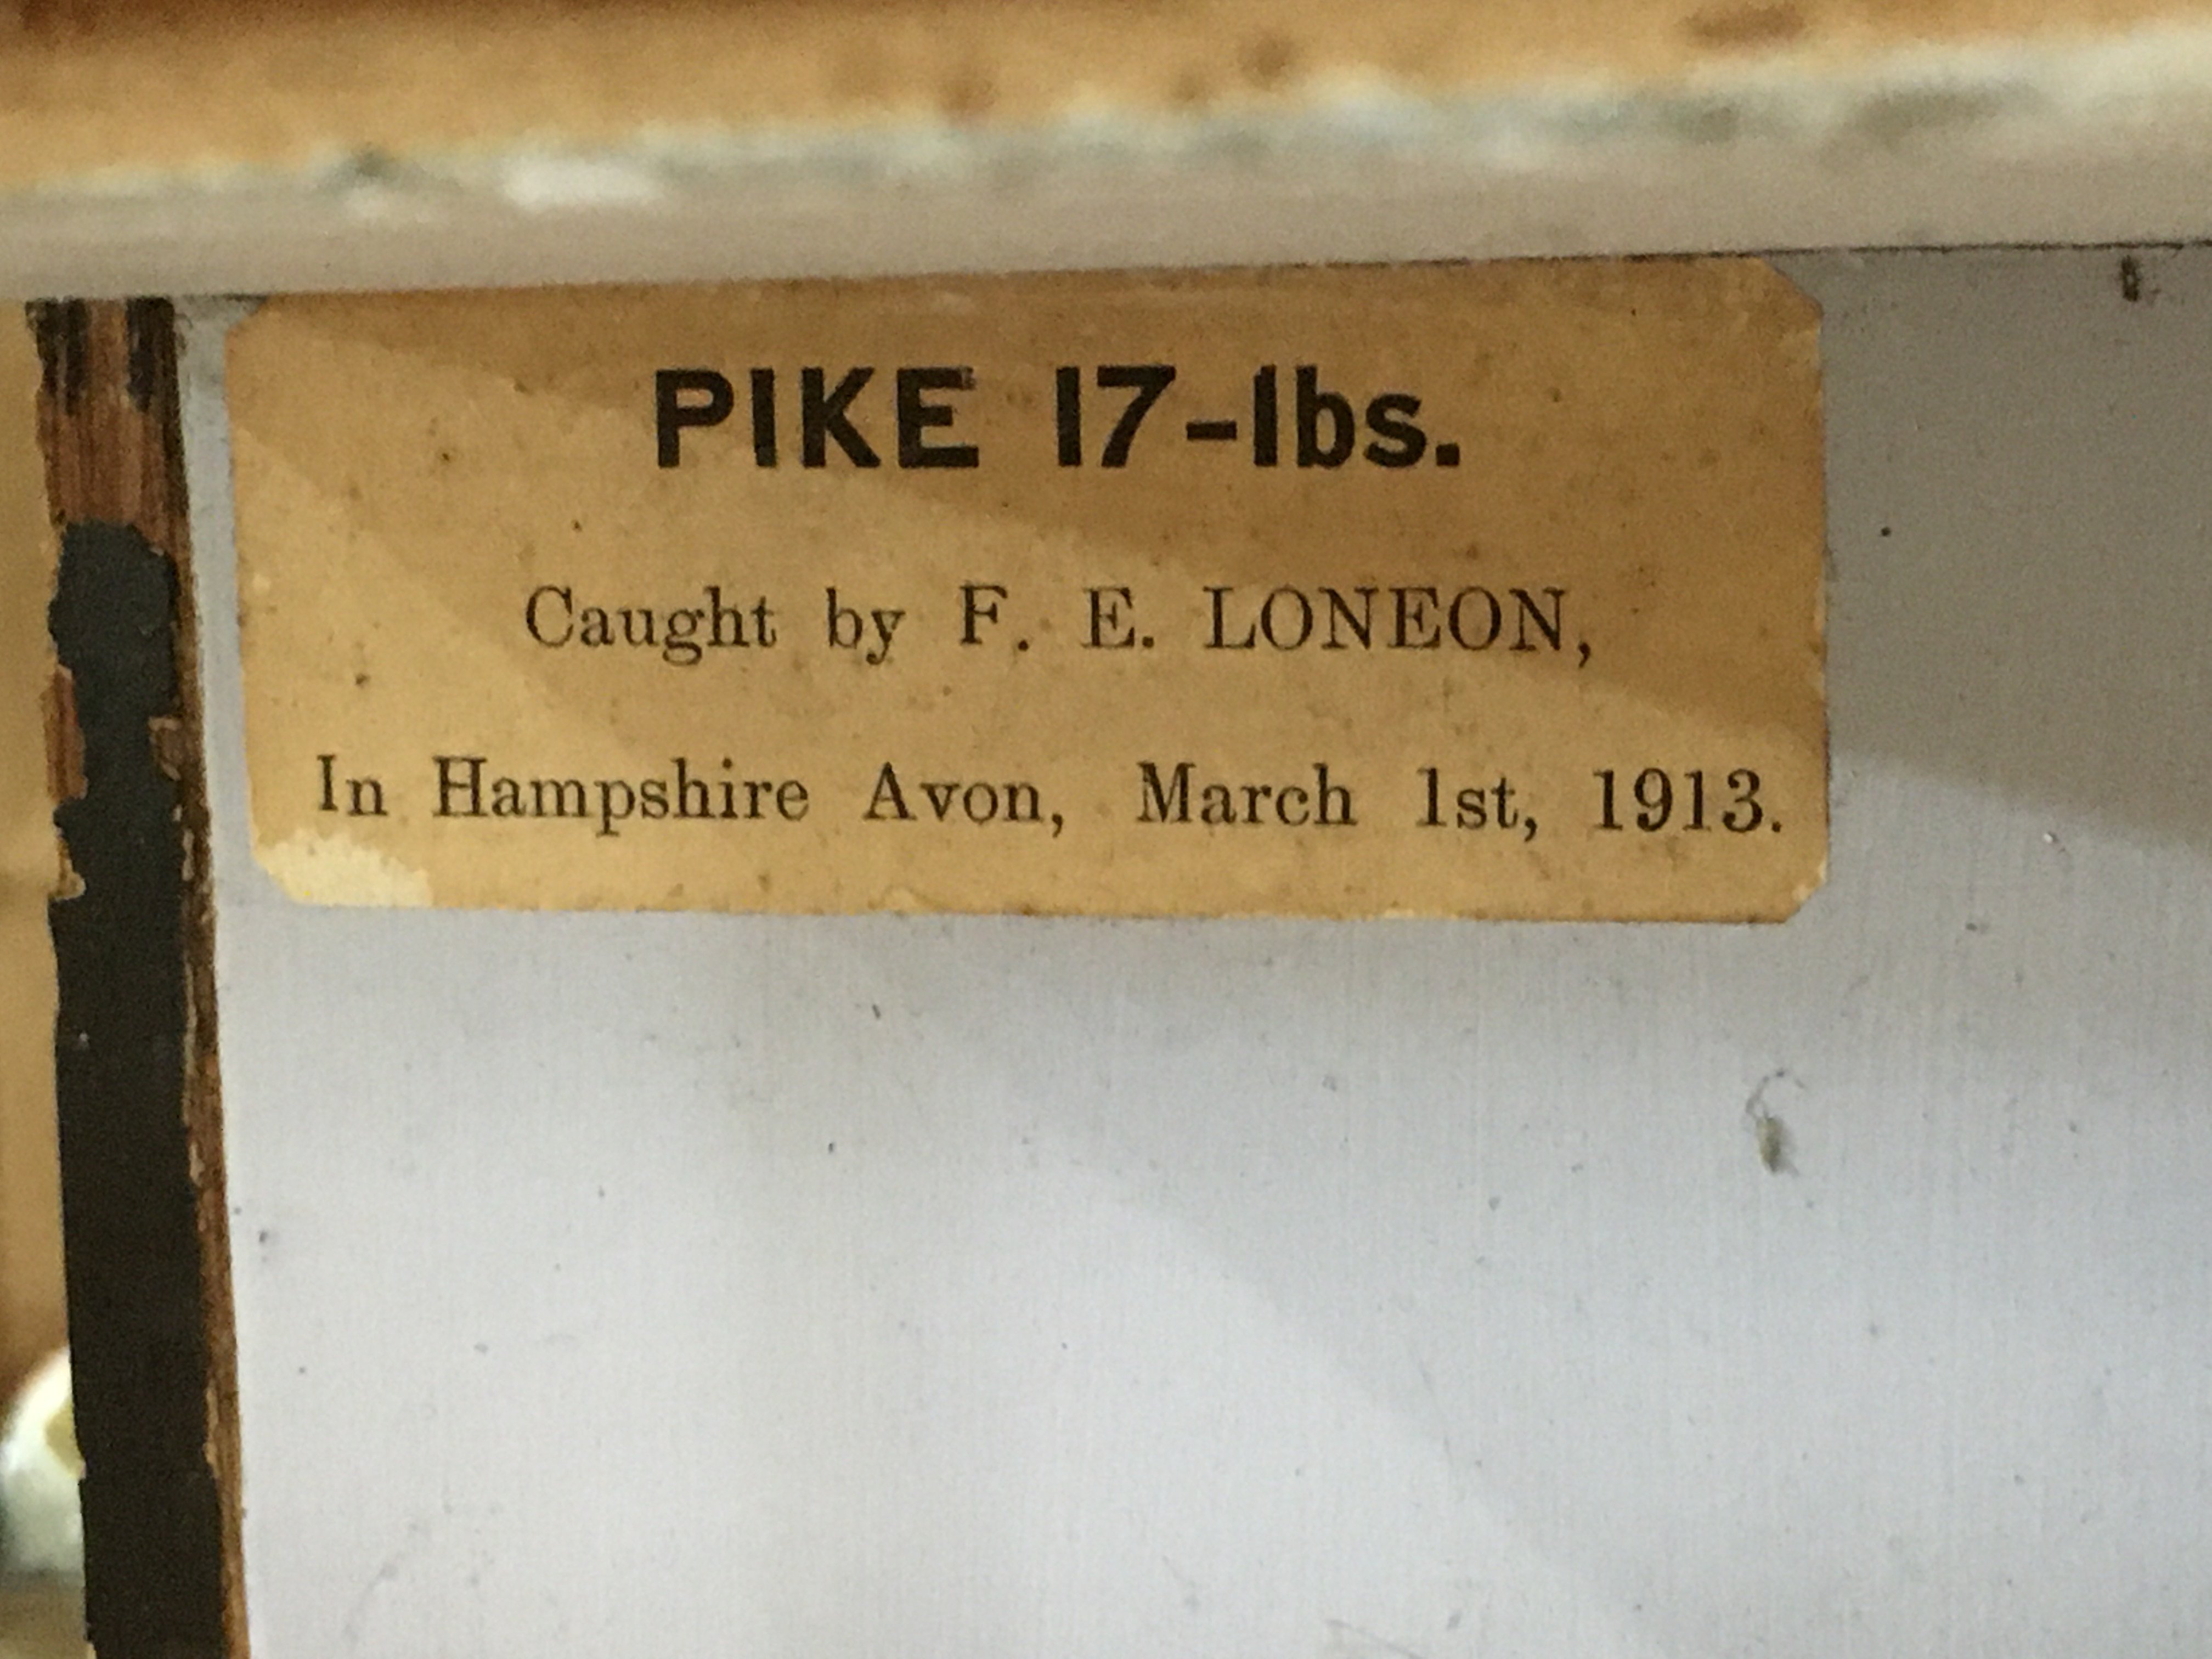 A taxidermy pike caught by F.E Loneon in Hampshire - Image 4 of 9